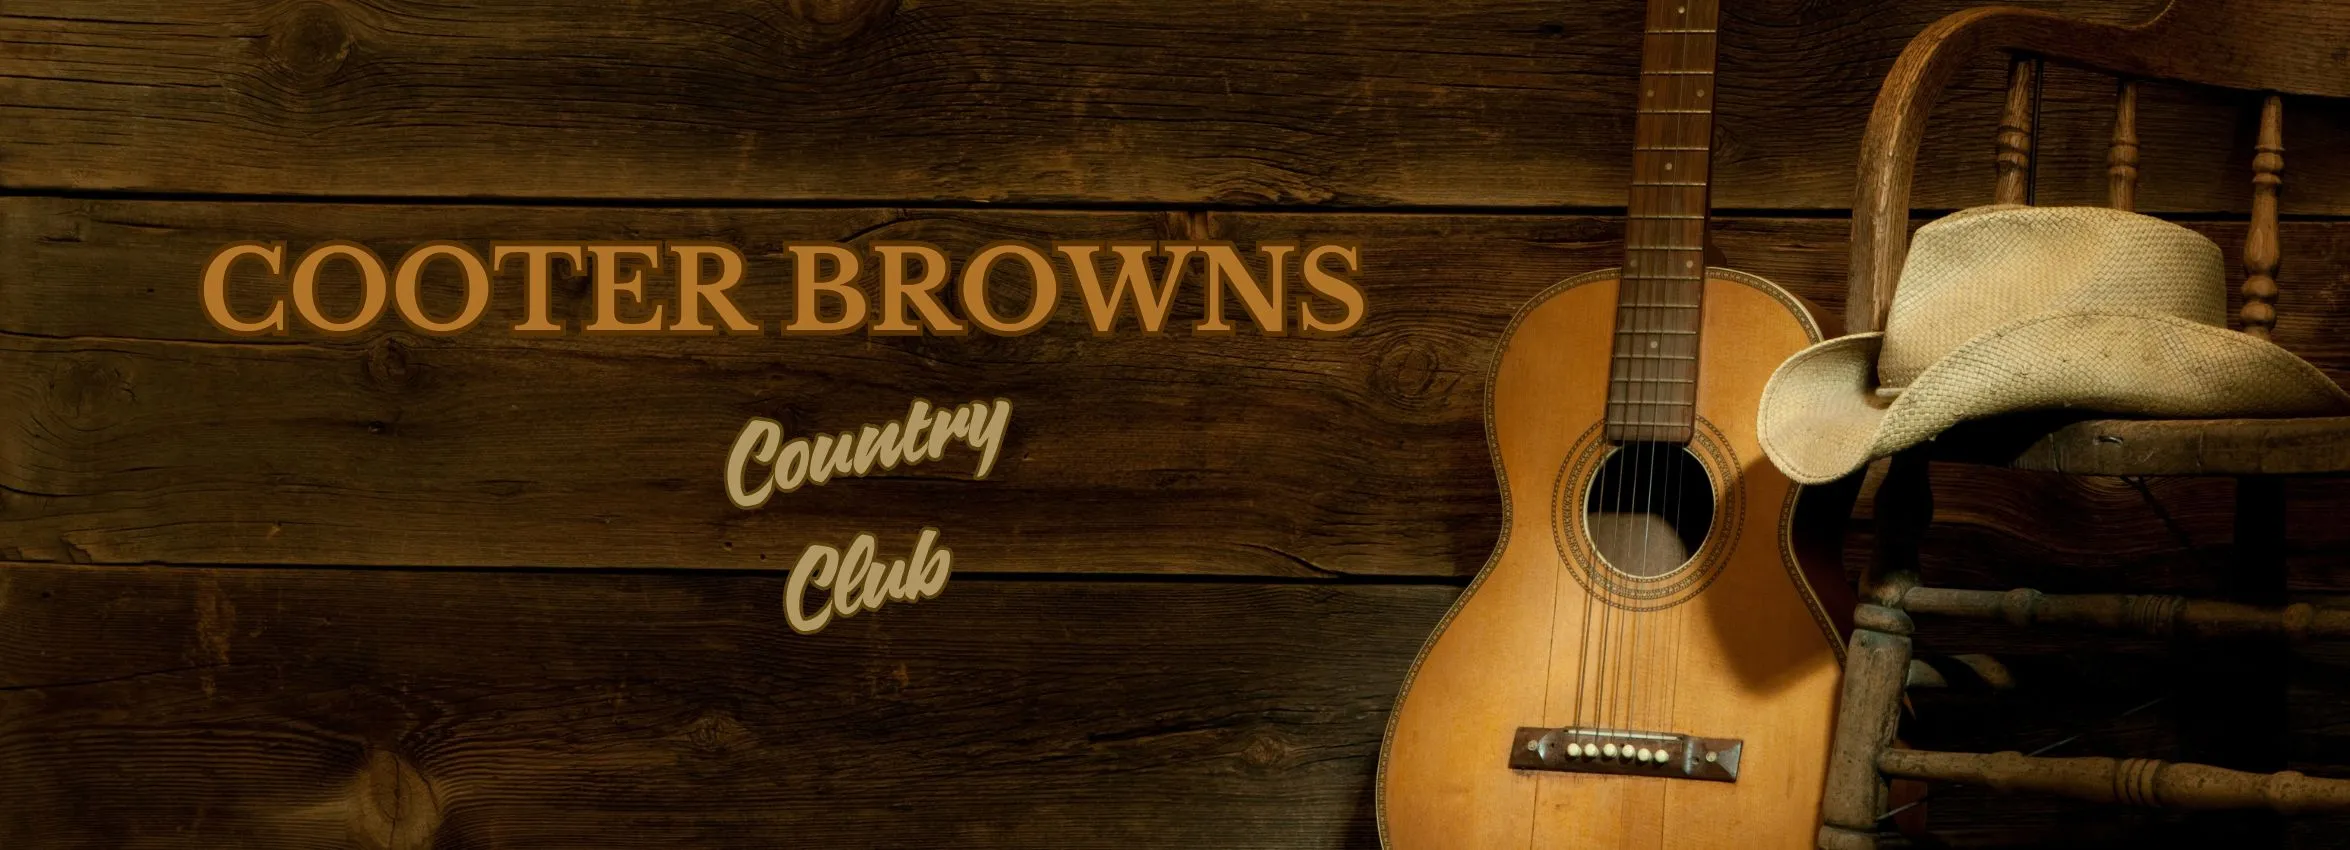 Cooter-Browns-Country-Club_Desktop_ET